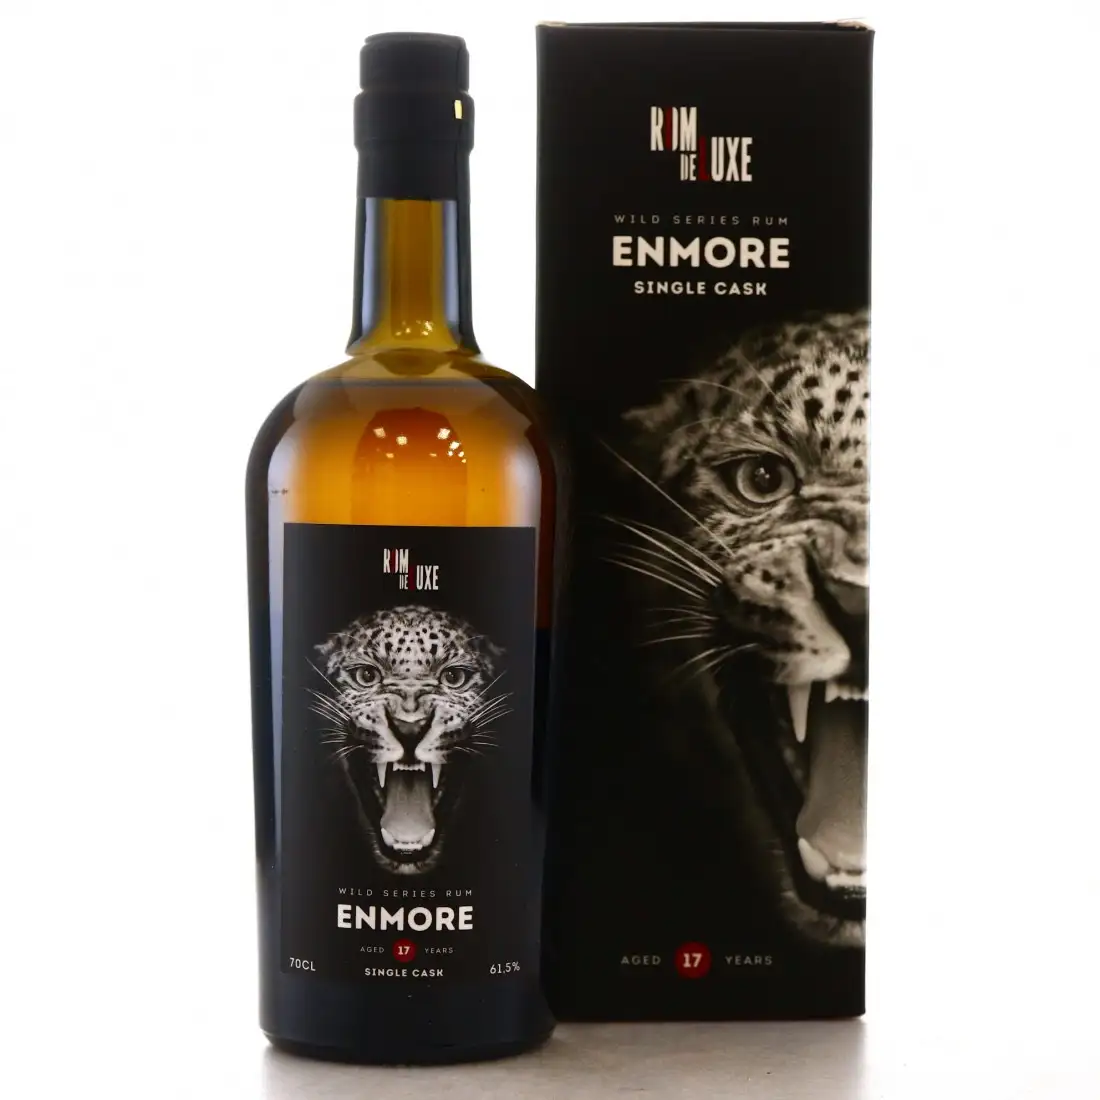 Image of the front of the bottle of the rum Wild Series Rum Enmore No. 2 EHP